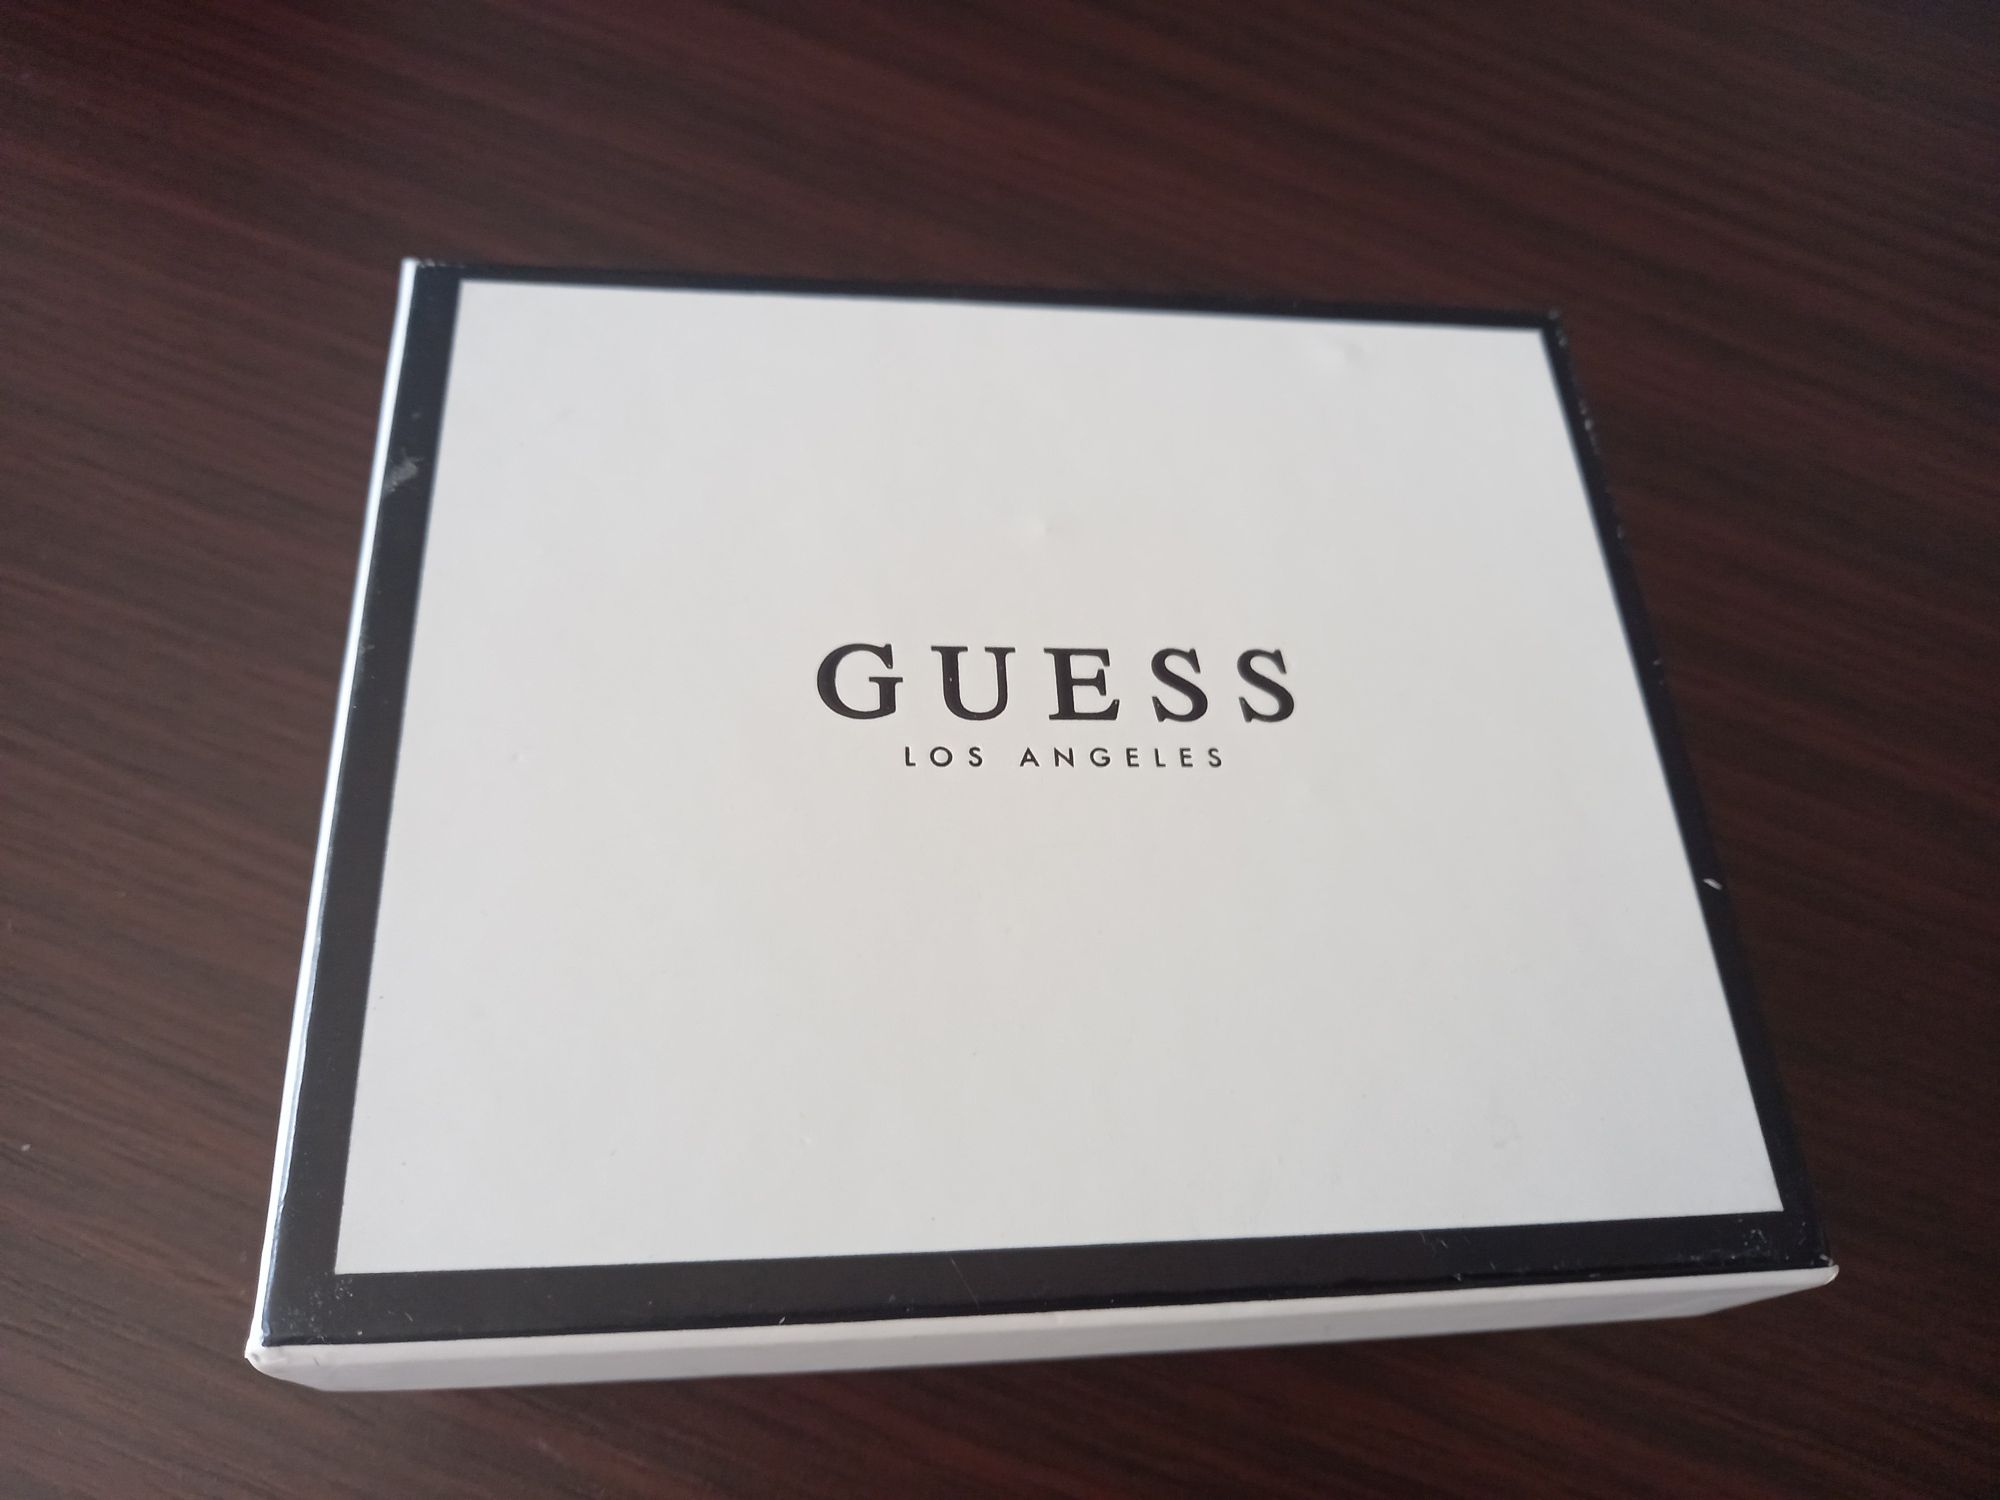 Pudelko guess biale